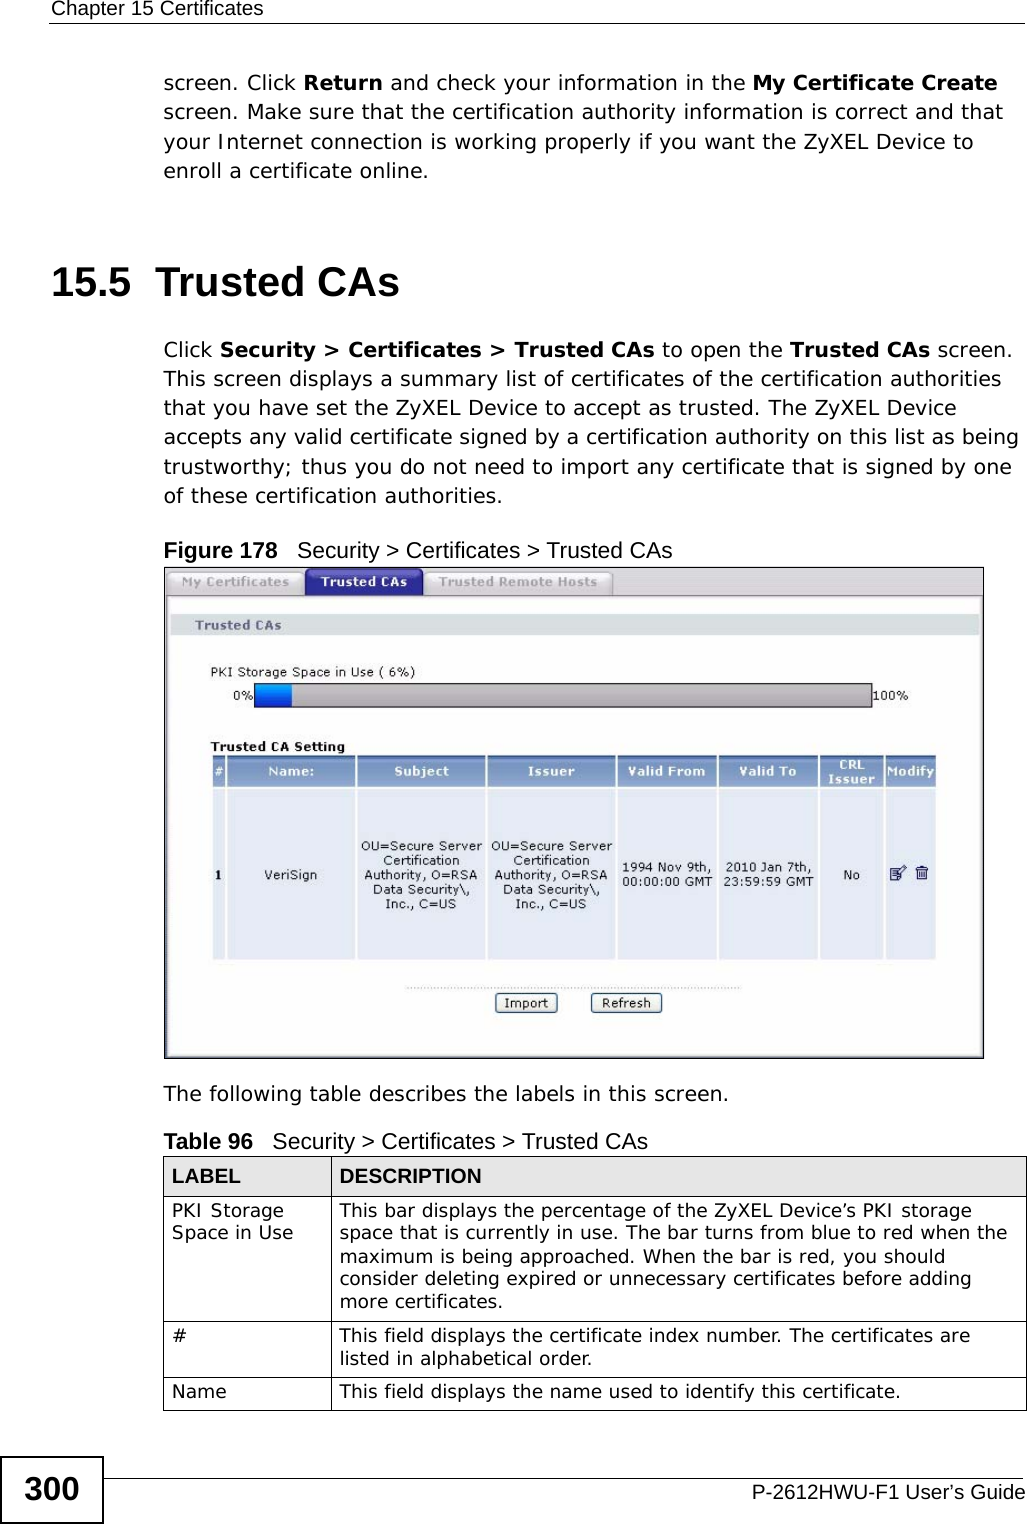 Chapter 15 CertificatesP-2612HWU-F1 User’s Guide300screen. Click Return and check your information in the My Certificate Create screen. Make sure that the certification authority information is correct and that your Internet connection is working properly if you want the ZyXEL Device to enroll a certificate online.15.5  Trusted CAs   Click Security &gt; Certificates &gt; Trusted CAs to open the Trusted CAs screen. This screen displays a summary list of certificates of the certification authorities that you have set the ZyXEL Device to accept as trusted. The ZyXEL Device accepts any valid certificate signed by a certification authority on this list as being trustworthy; thus you do not need to import any certificate that is signed by one of these certification authorities. Figure 178   Security &gt; Certificates &gt; Trusted CAsThe following table describes the labels in this screen. Table 96   Security &gt; Certificates &gt; Trusted CAsLABEL DESCRIPTIONPKI Storage Space in Use This bar displays the percentage of the ZyXEL Device’s PKI storage space that is currently in use. The bar turns from blue to red when the maximum is being approached. When the bar is red, you should consider deleting expired or unnecessary certificates before adding more certificates.# This field displays the certificate index number. The certificates are listed in alphabetical order. Name This field displays the name used to identify this certificate. 